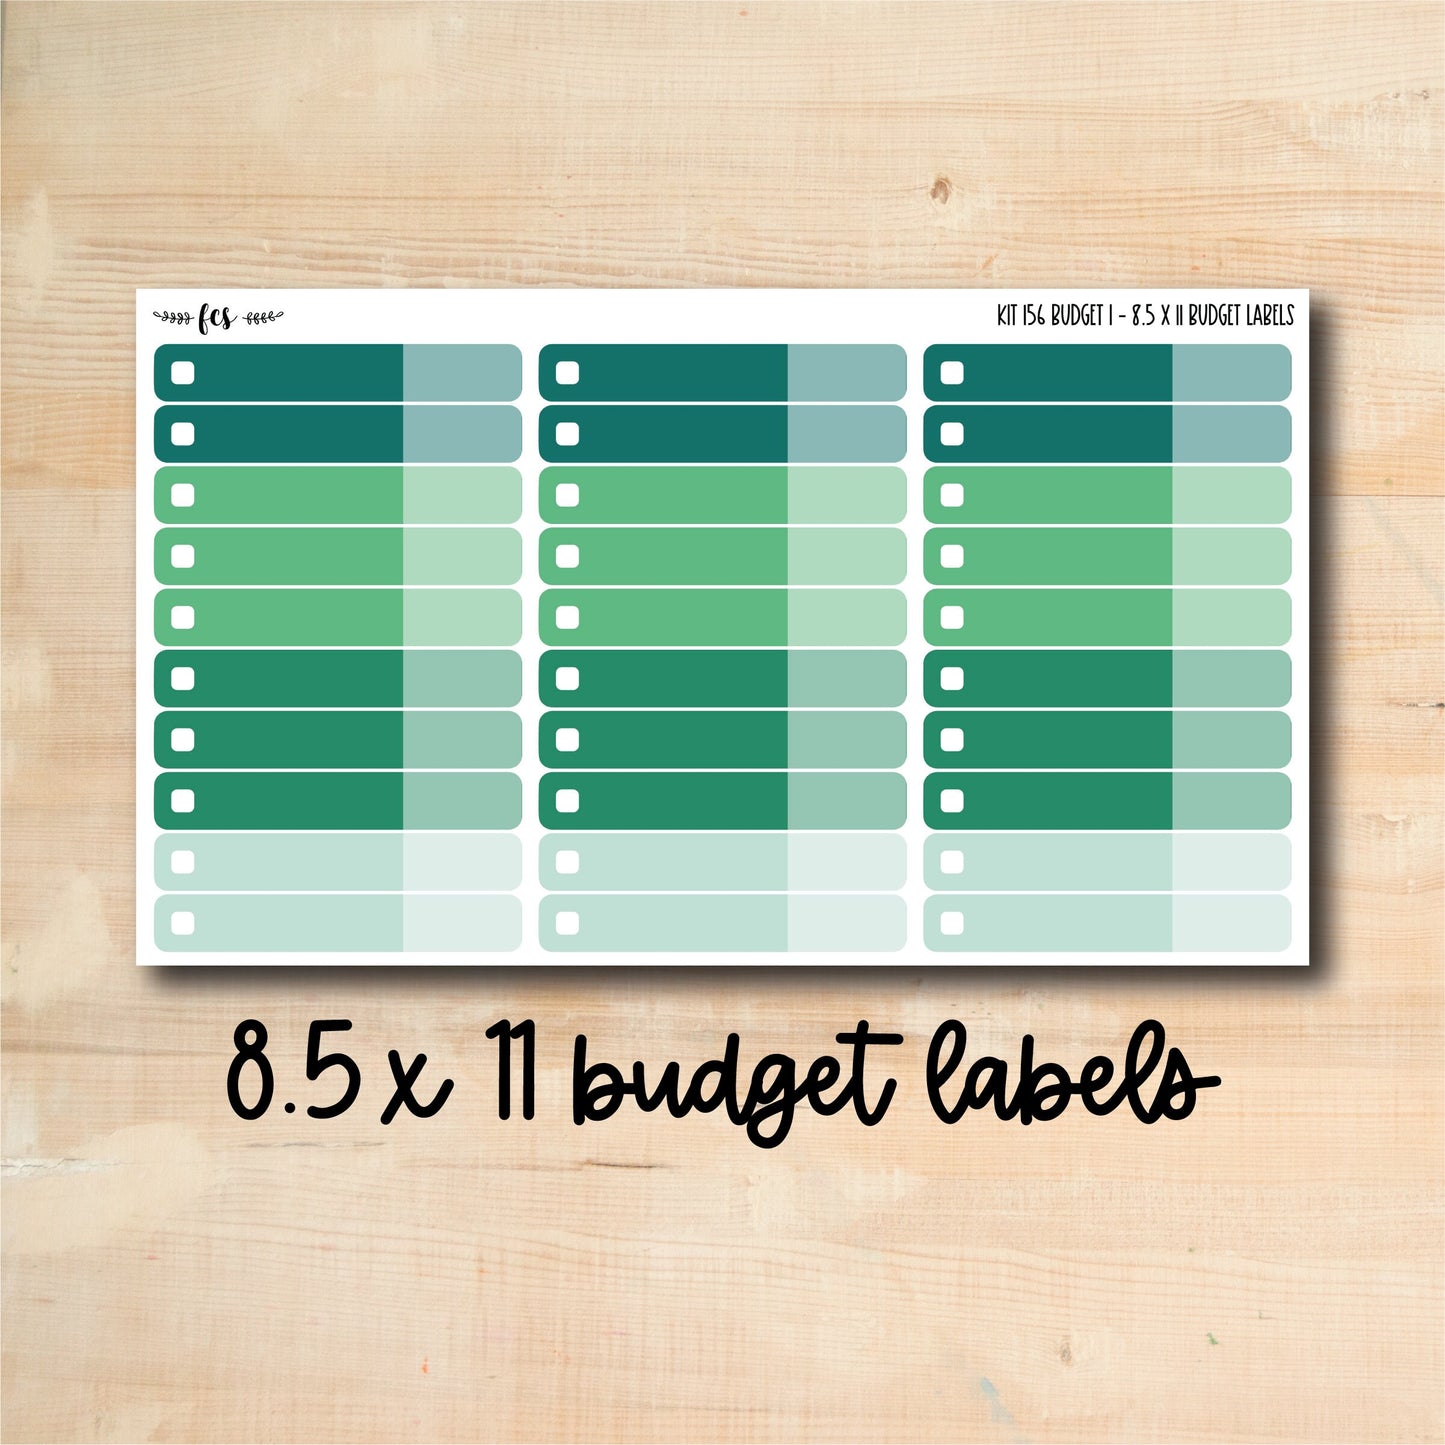 BUDGET-156 || LUCKY 8.5x11 budget labels